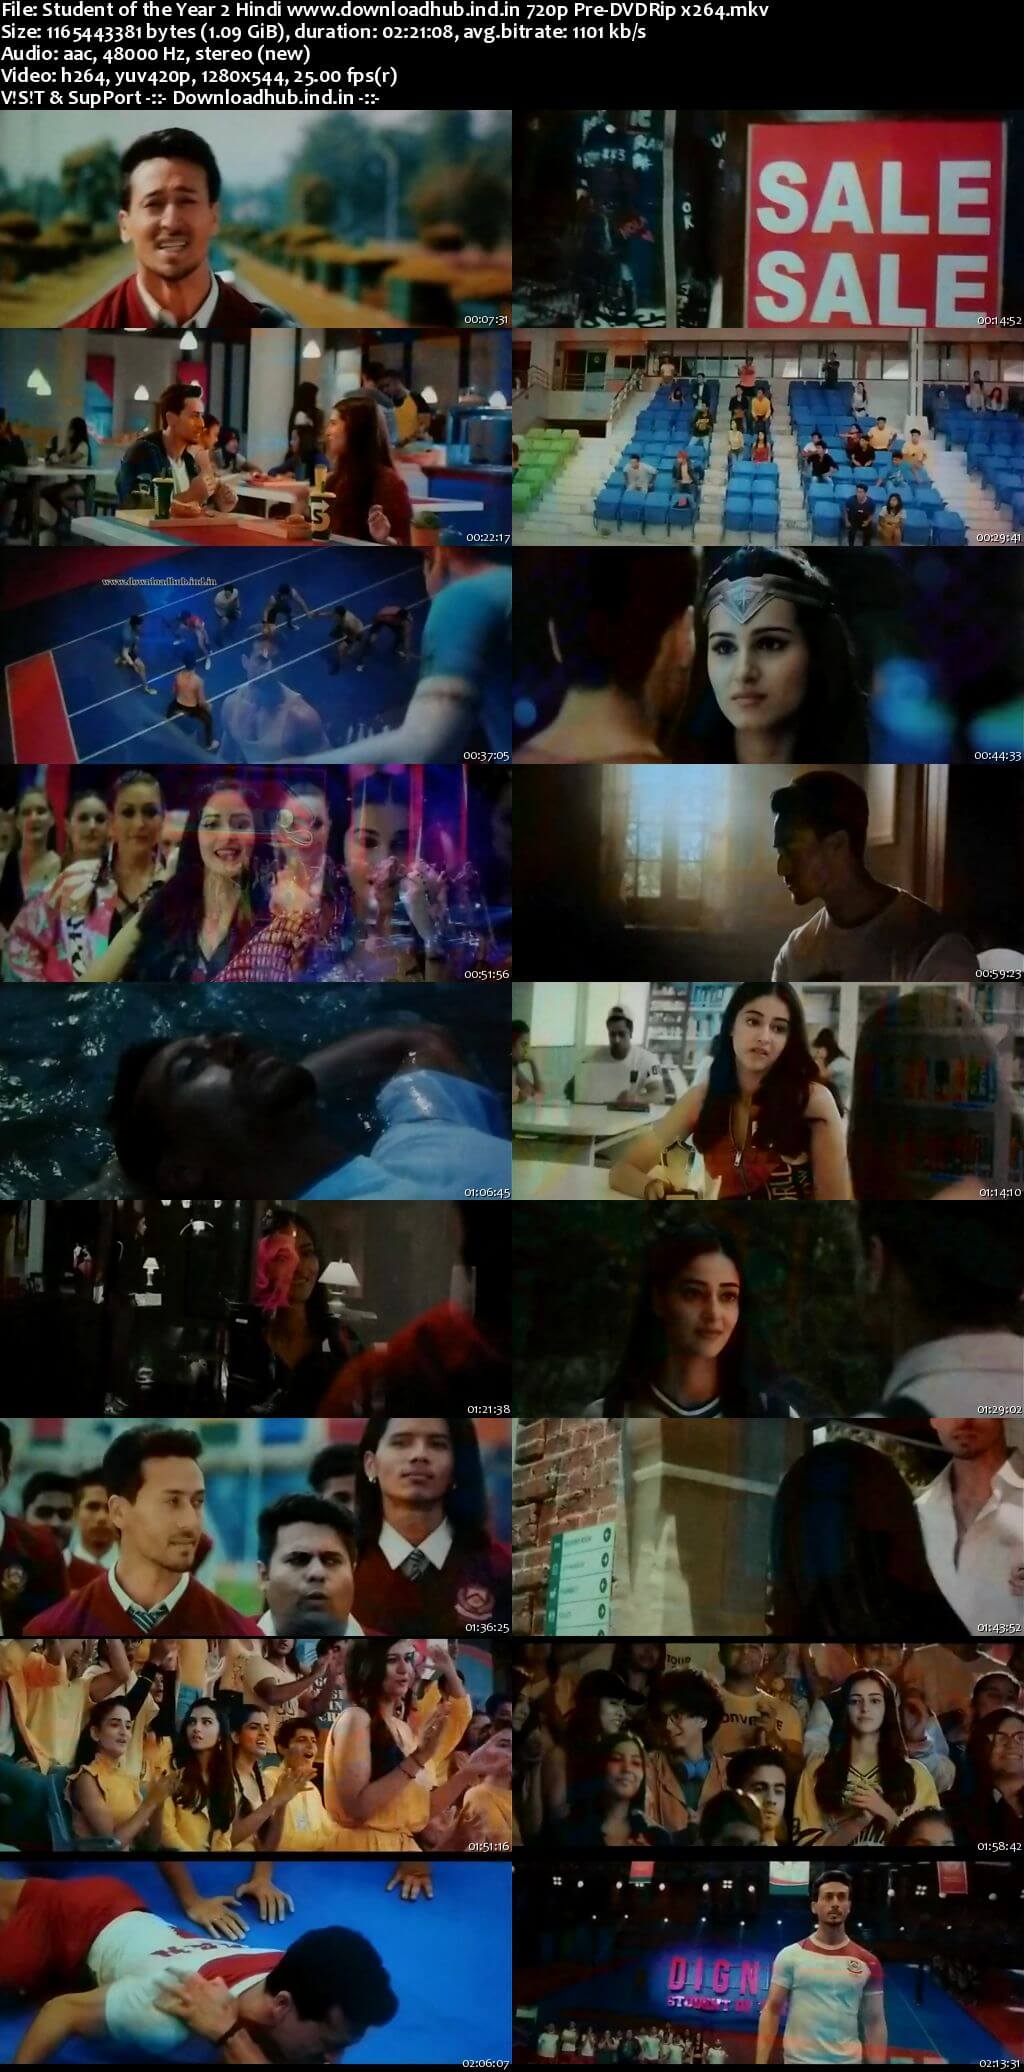 Student of the Year 2 2019 Hindi 720p Pre-DVDRip x264